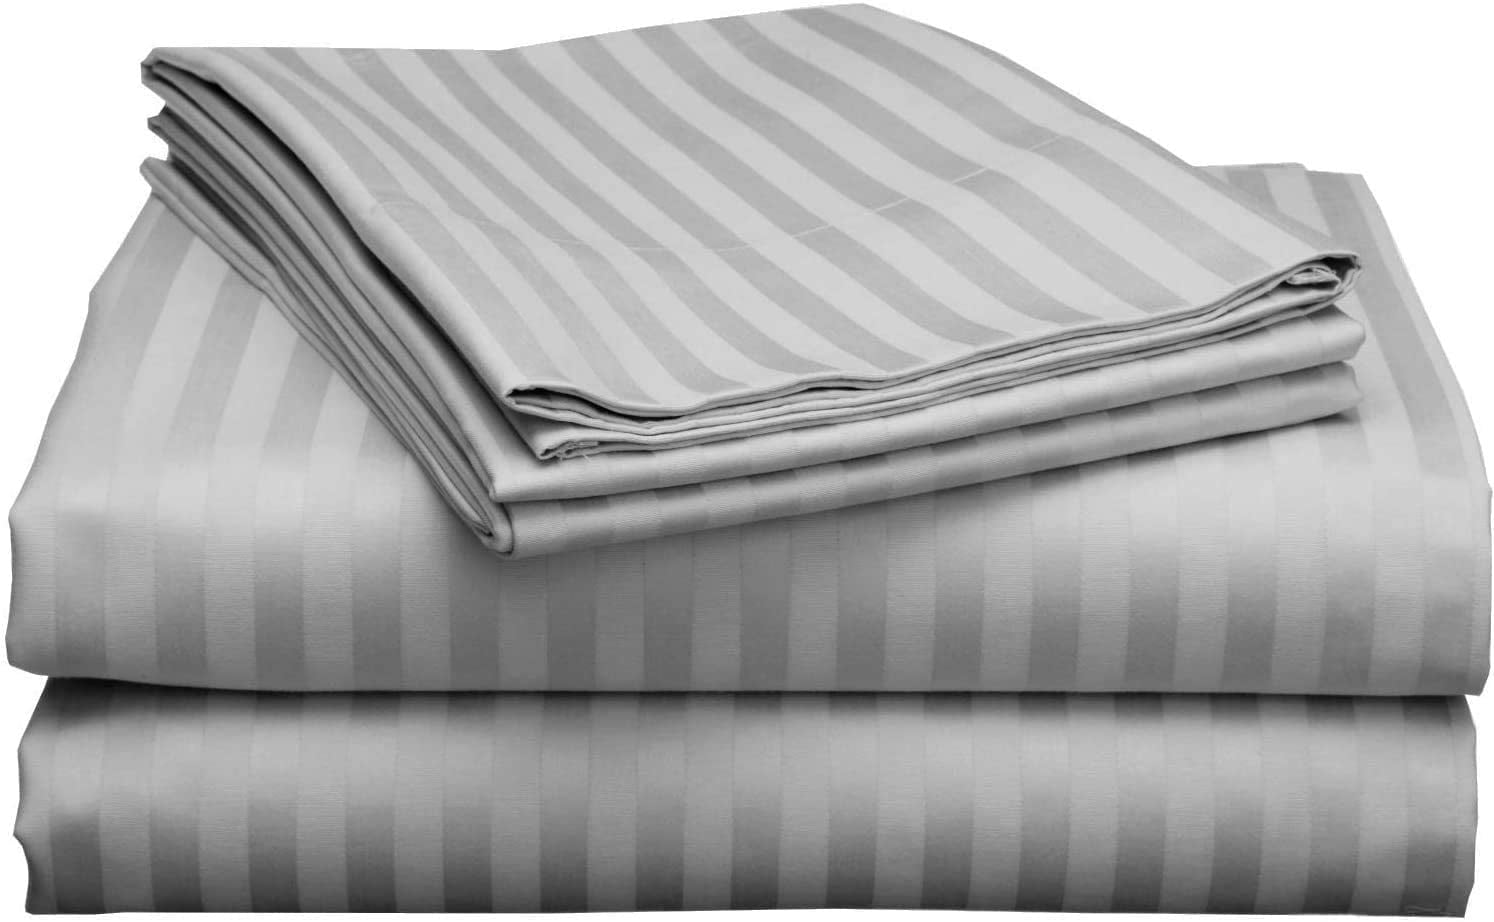 2 Pillow Cover 800 TC Light Grey Stripe Ultra Soft 100% Cotton 1 Fitted Sheet 